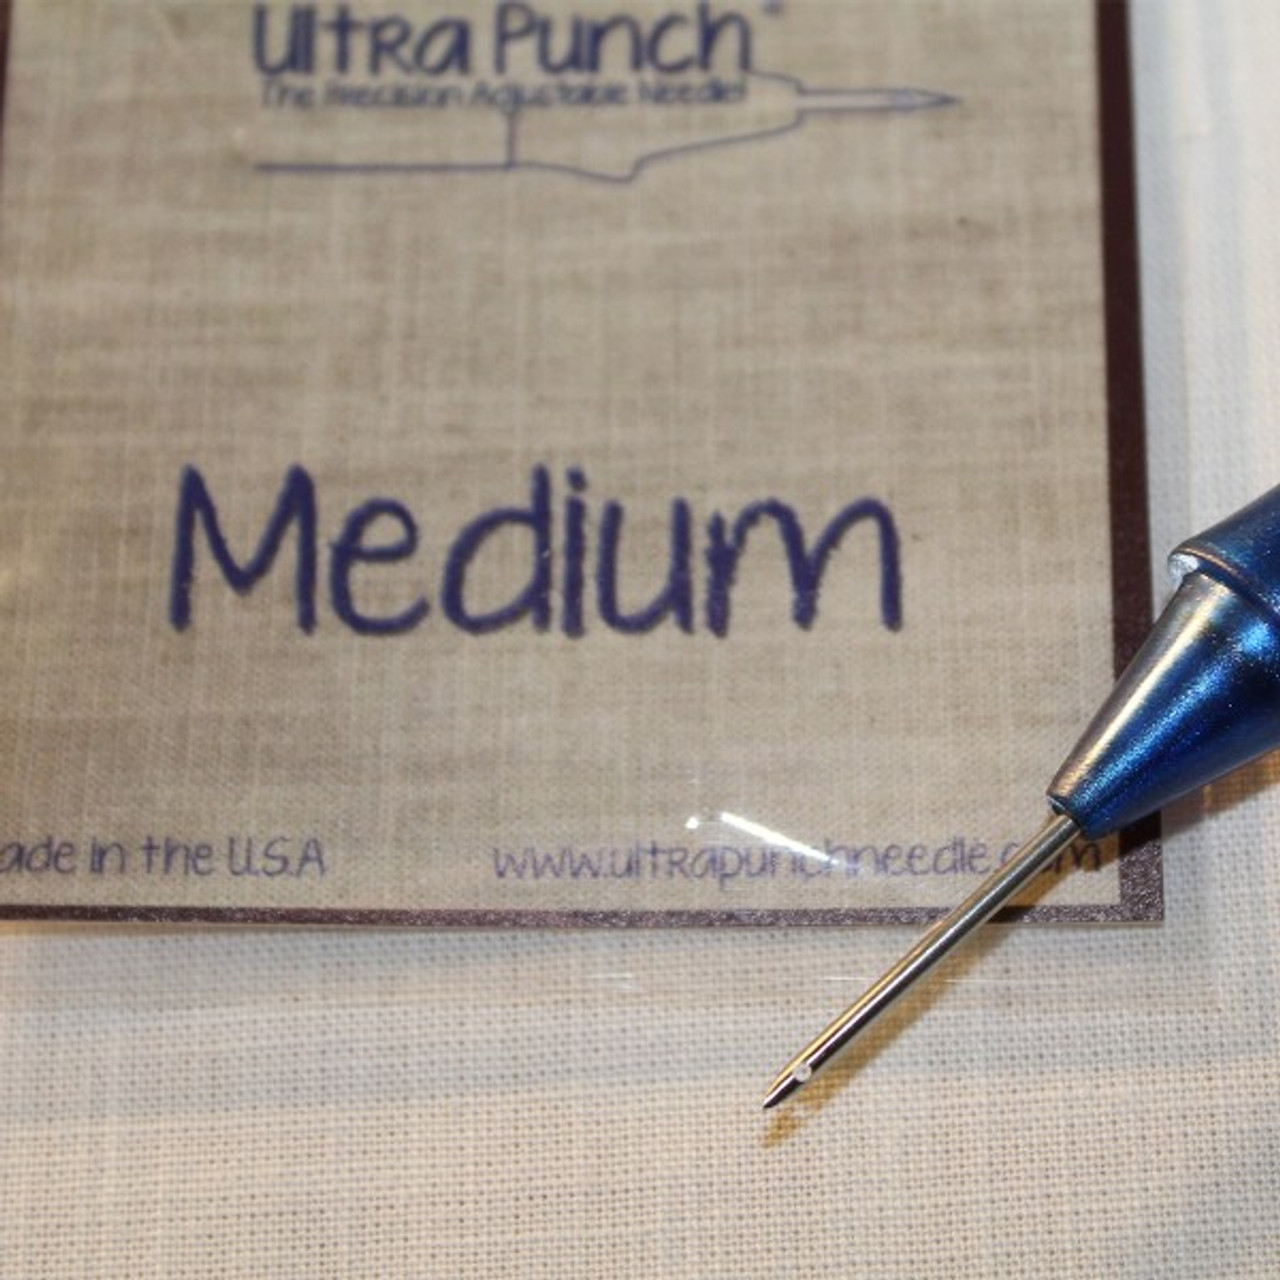 Ultra Punch Needle Tip